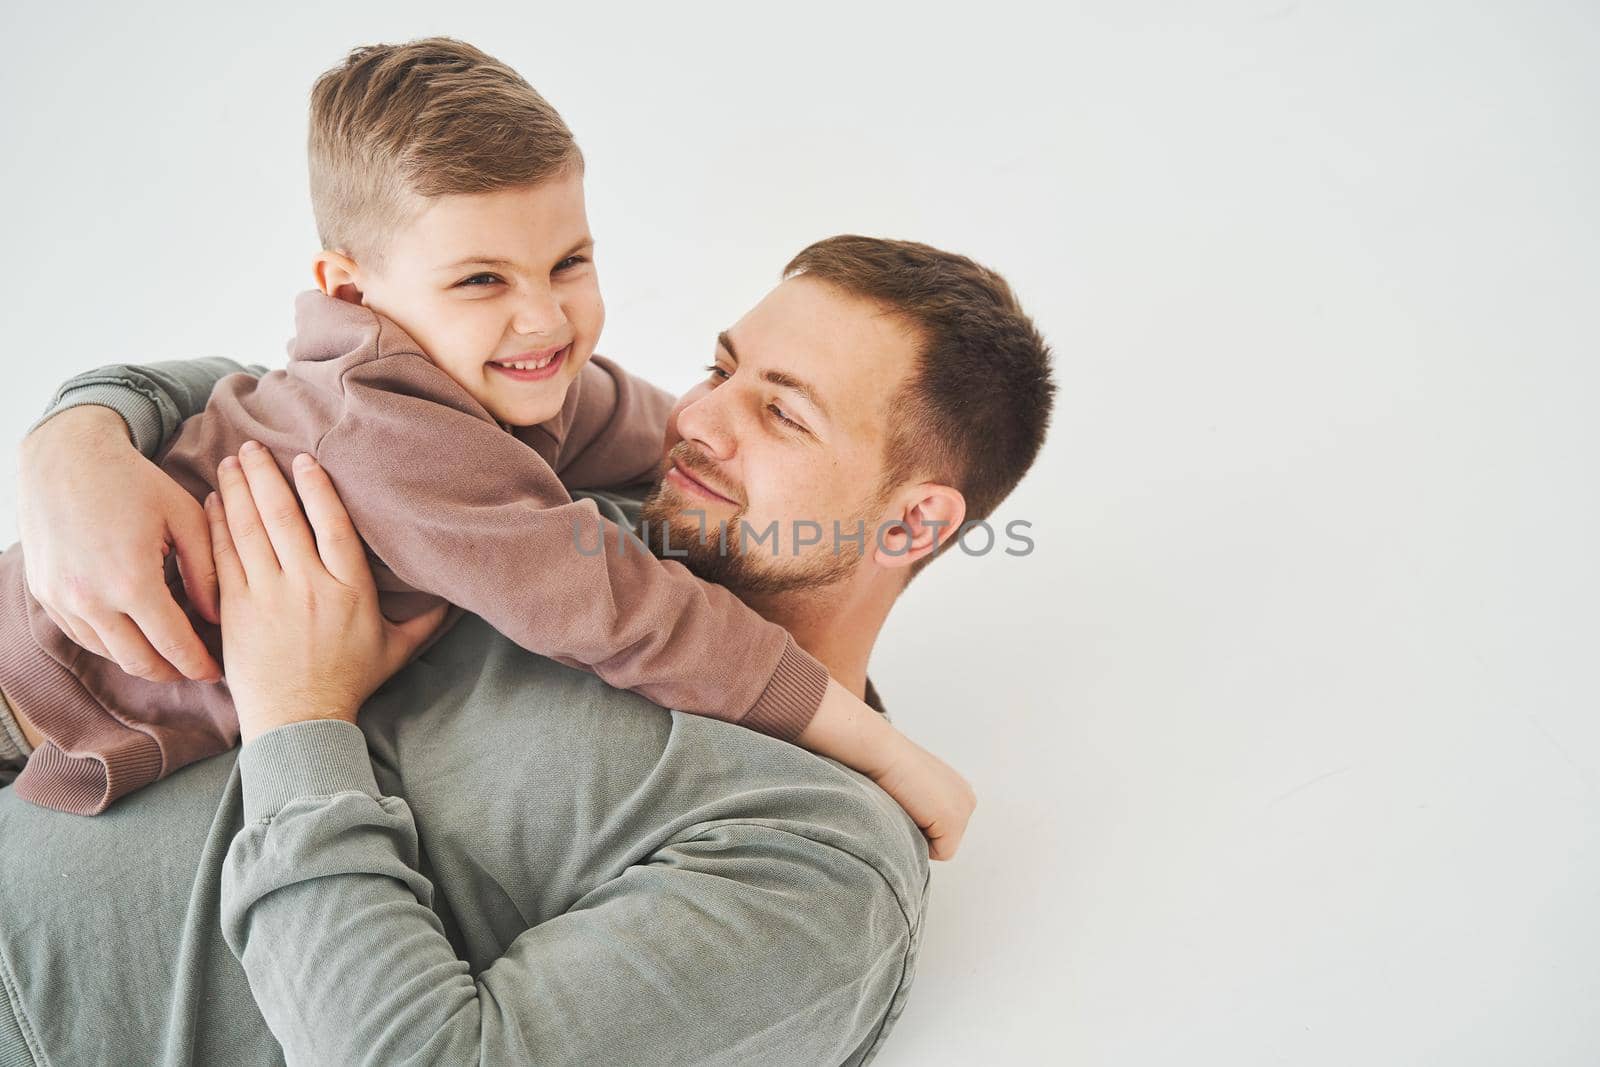 Close-up portrait of smiling father and son. Handsome dad and cheerful and emotional kid. Paternity